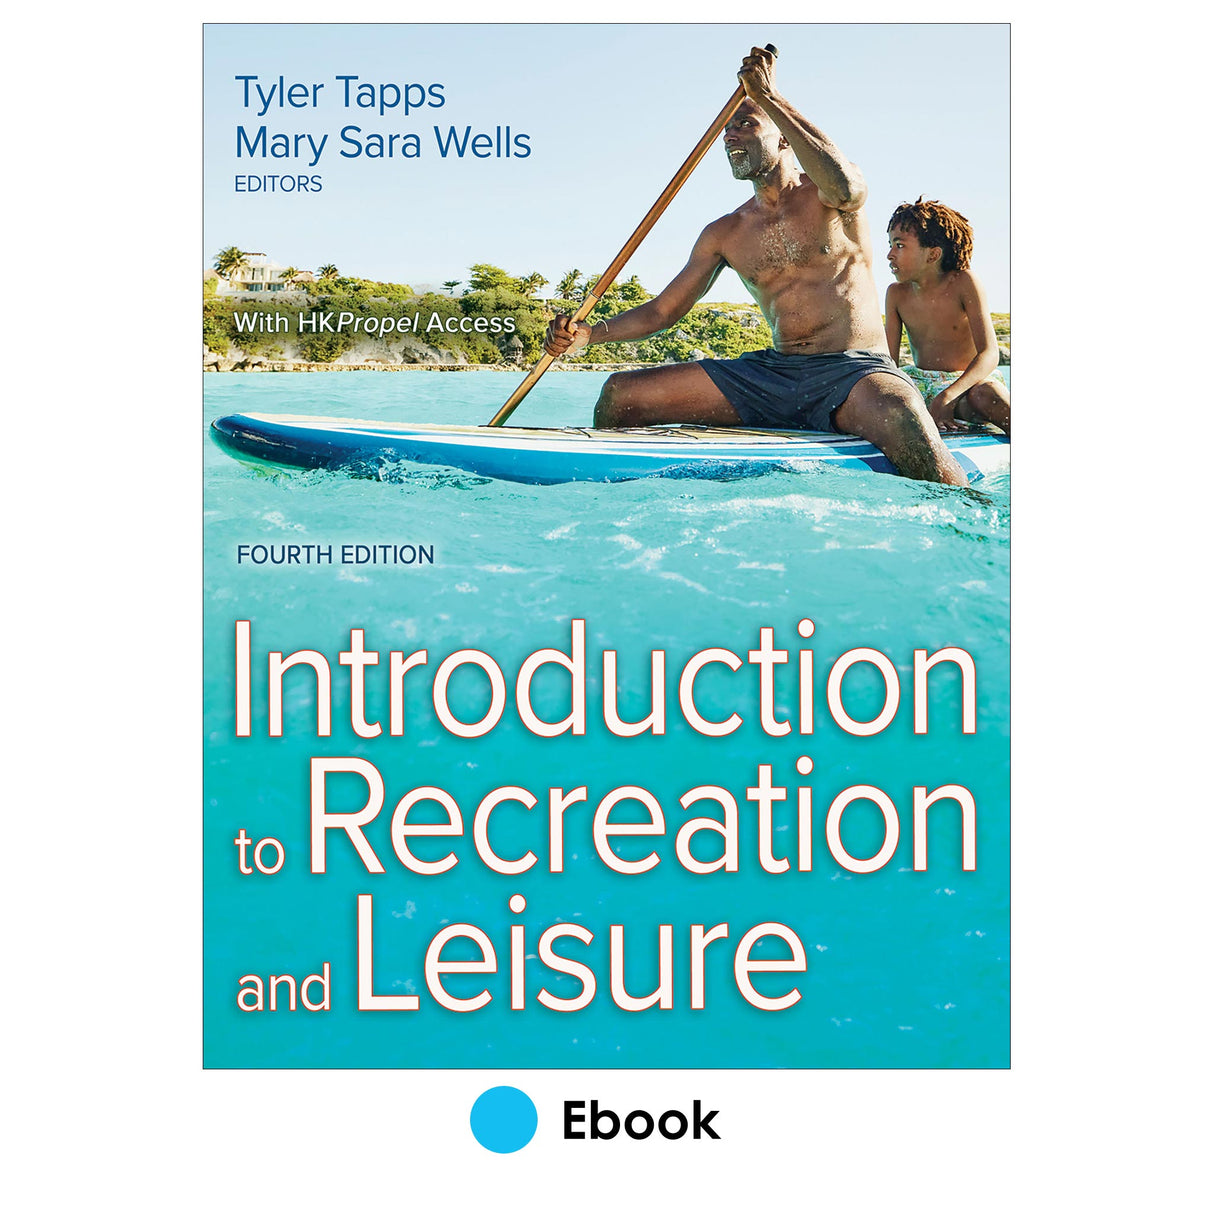 Introduction to Recreation and Leisure 4th Edition Ebook With HKPropel Access